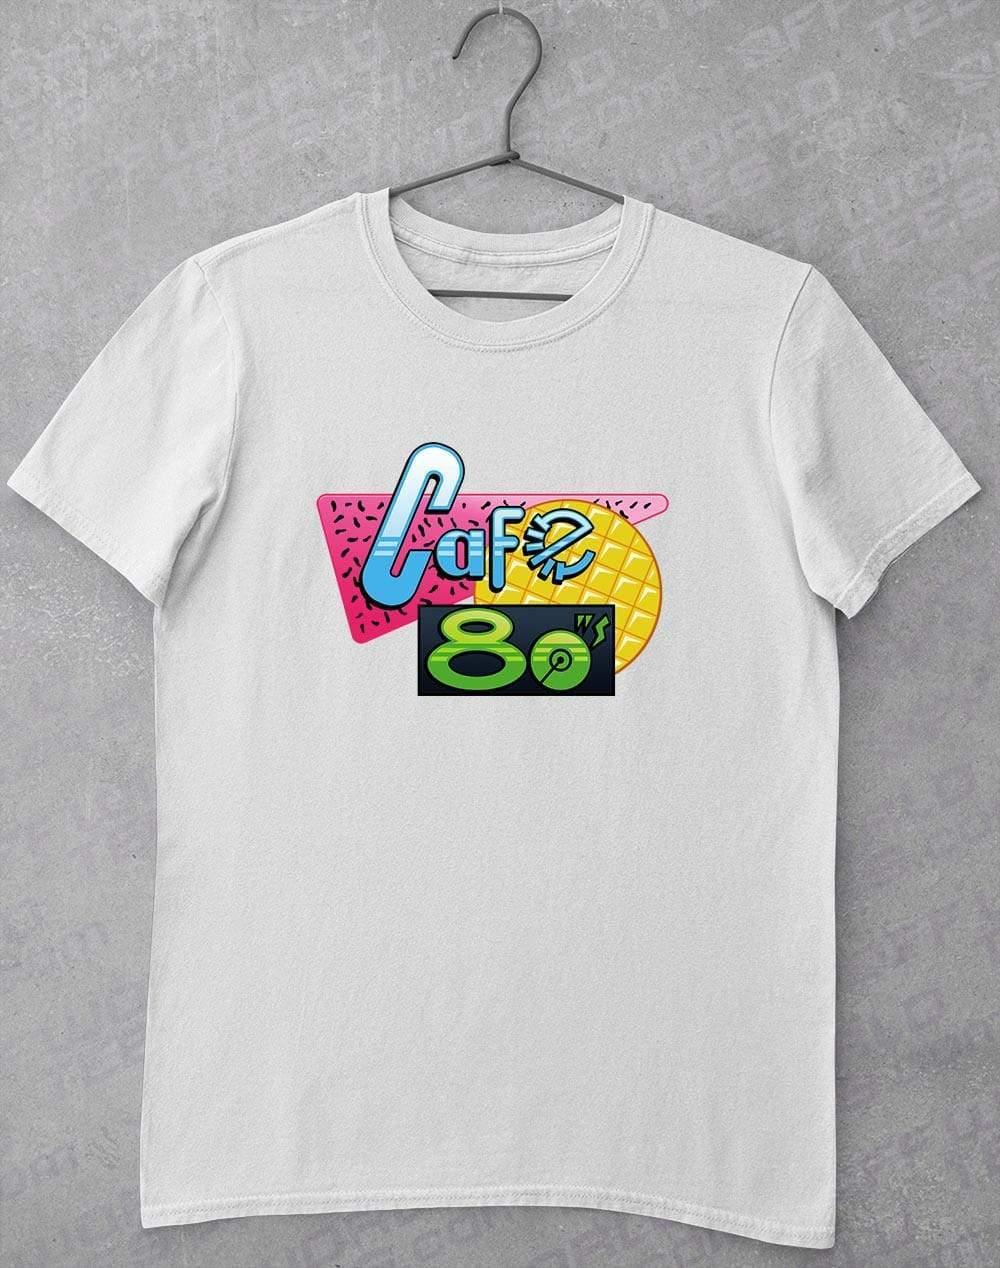 Cafe 80's T-Shirt S / White  - Off World Tees